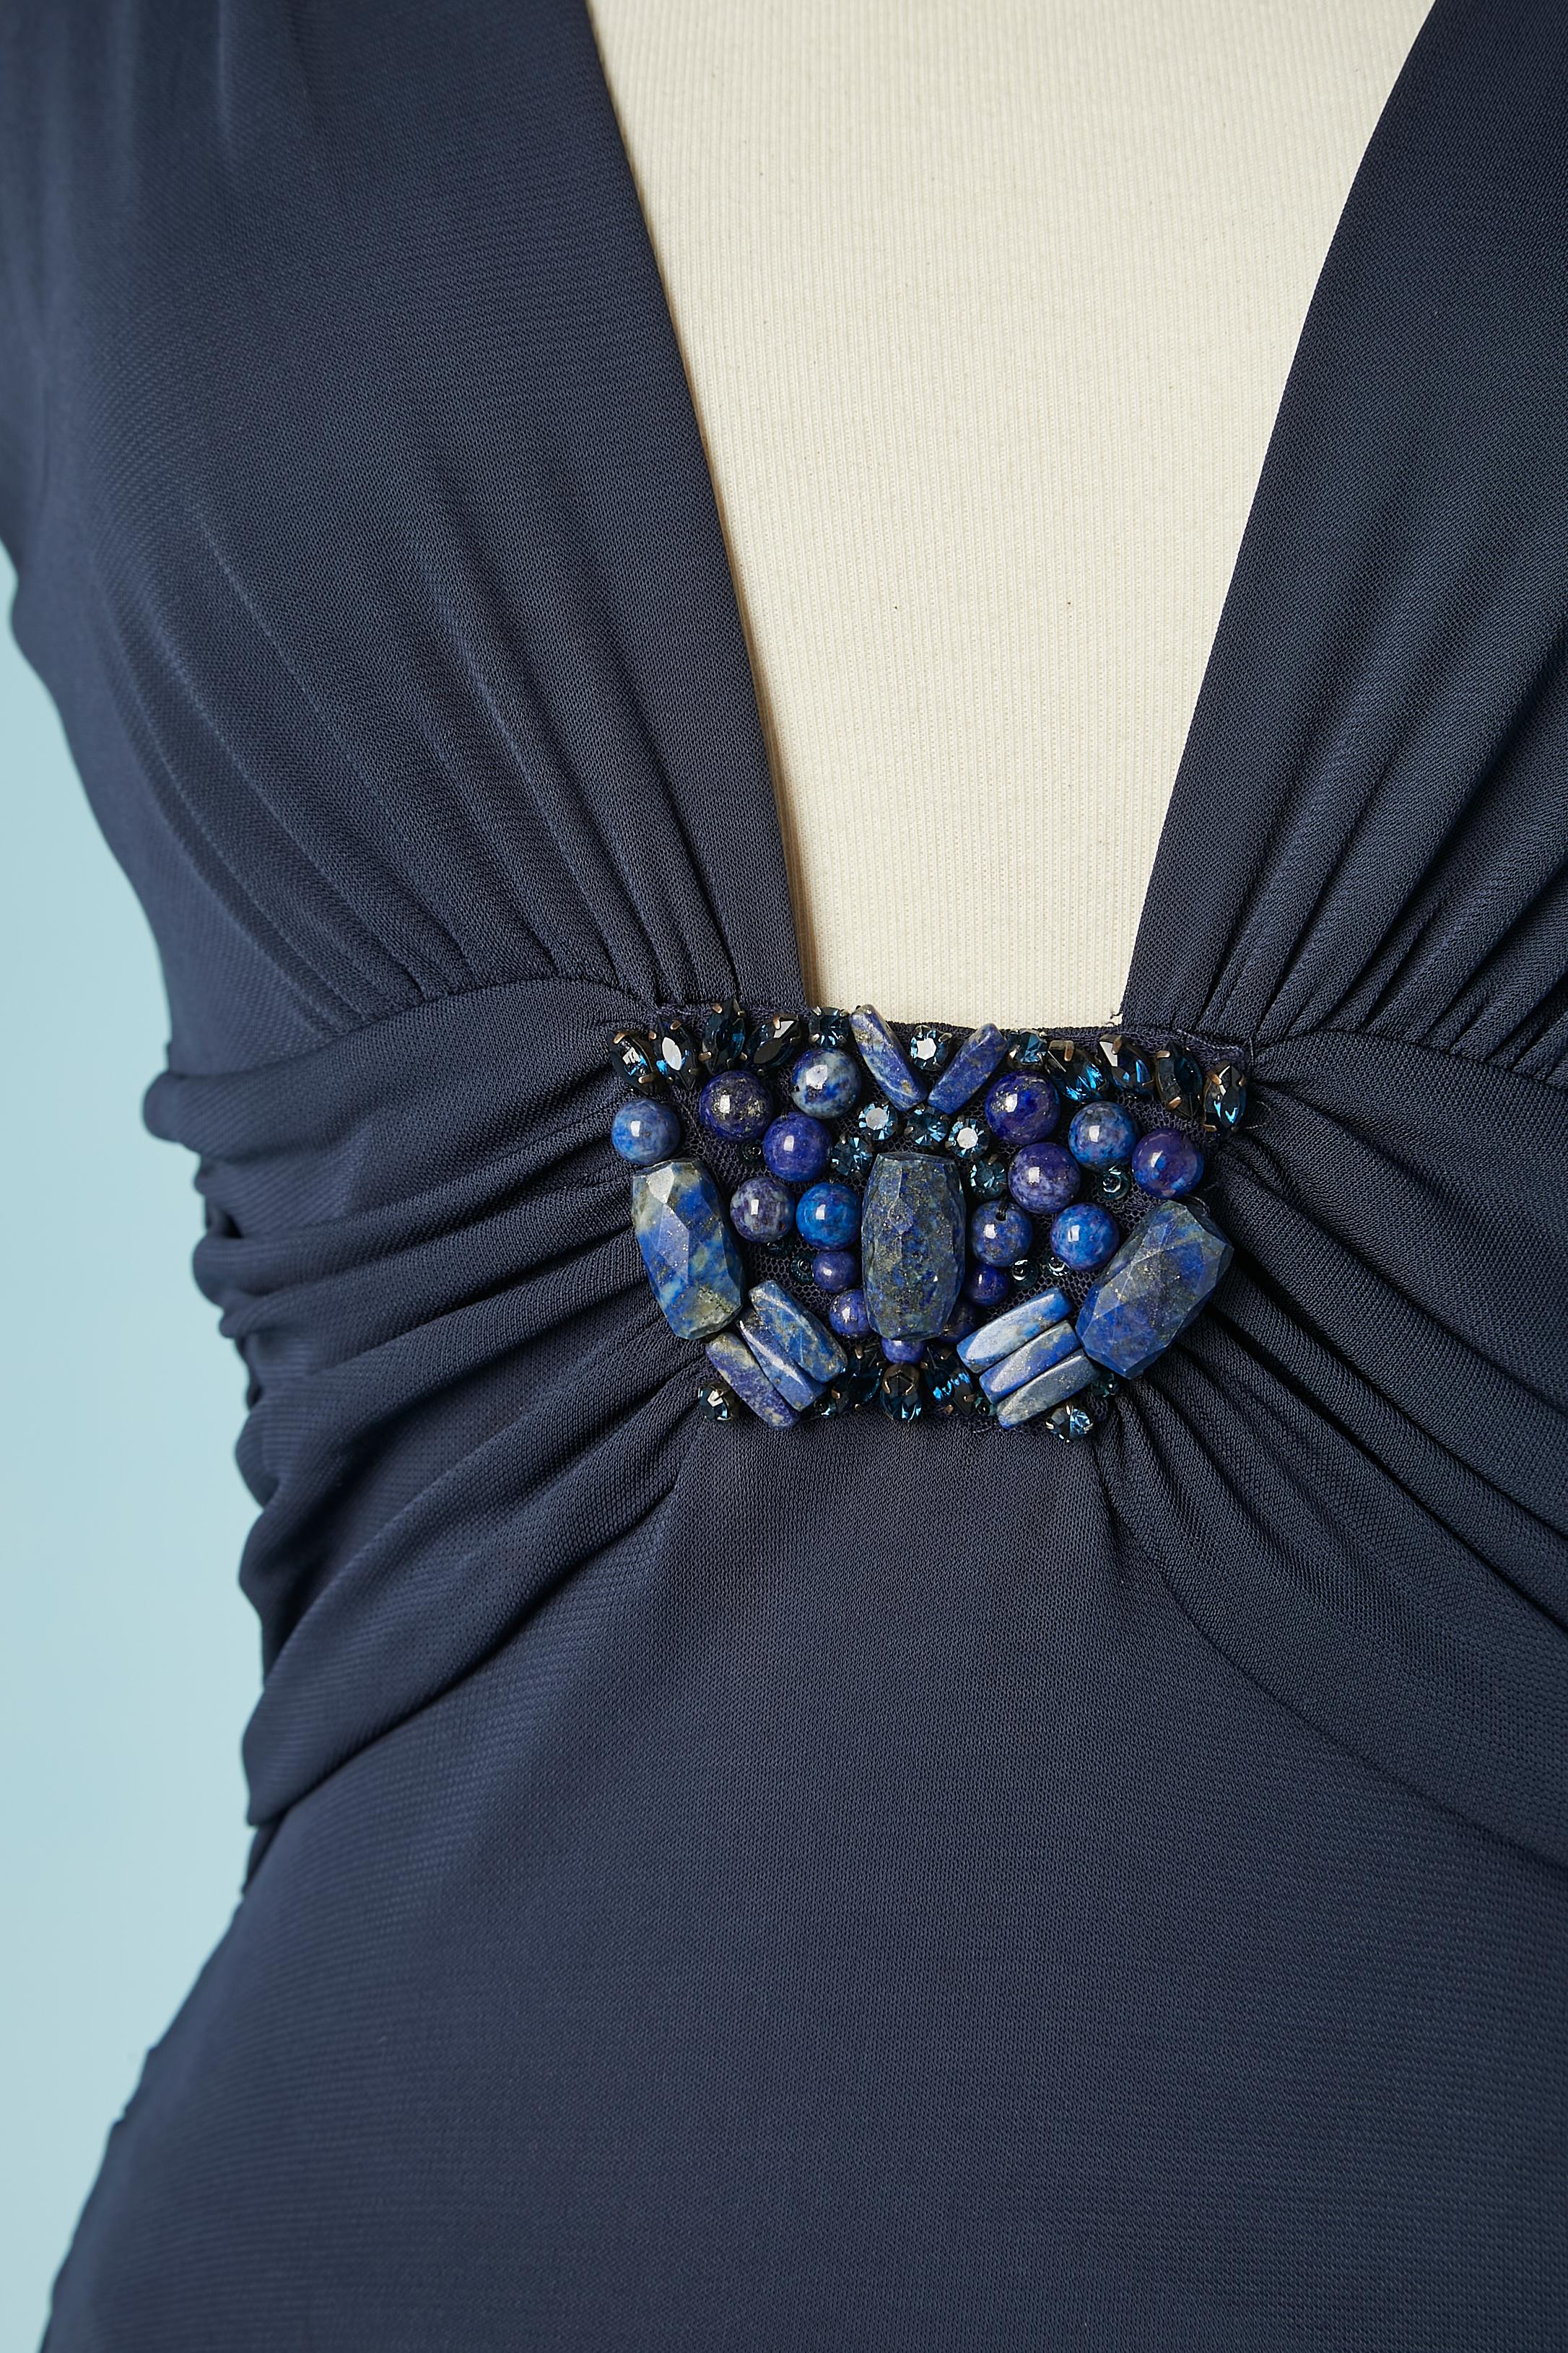 Navy blue evening dress draped and beadwork on the waist . Fabric composition dress and lining : 100% rayon.
Zip on the left side with branded zip-puller. 
Split in the middle front, lenght = 65 cm
SIZE M